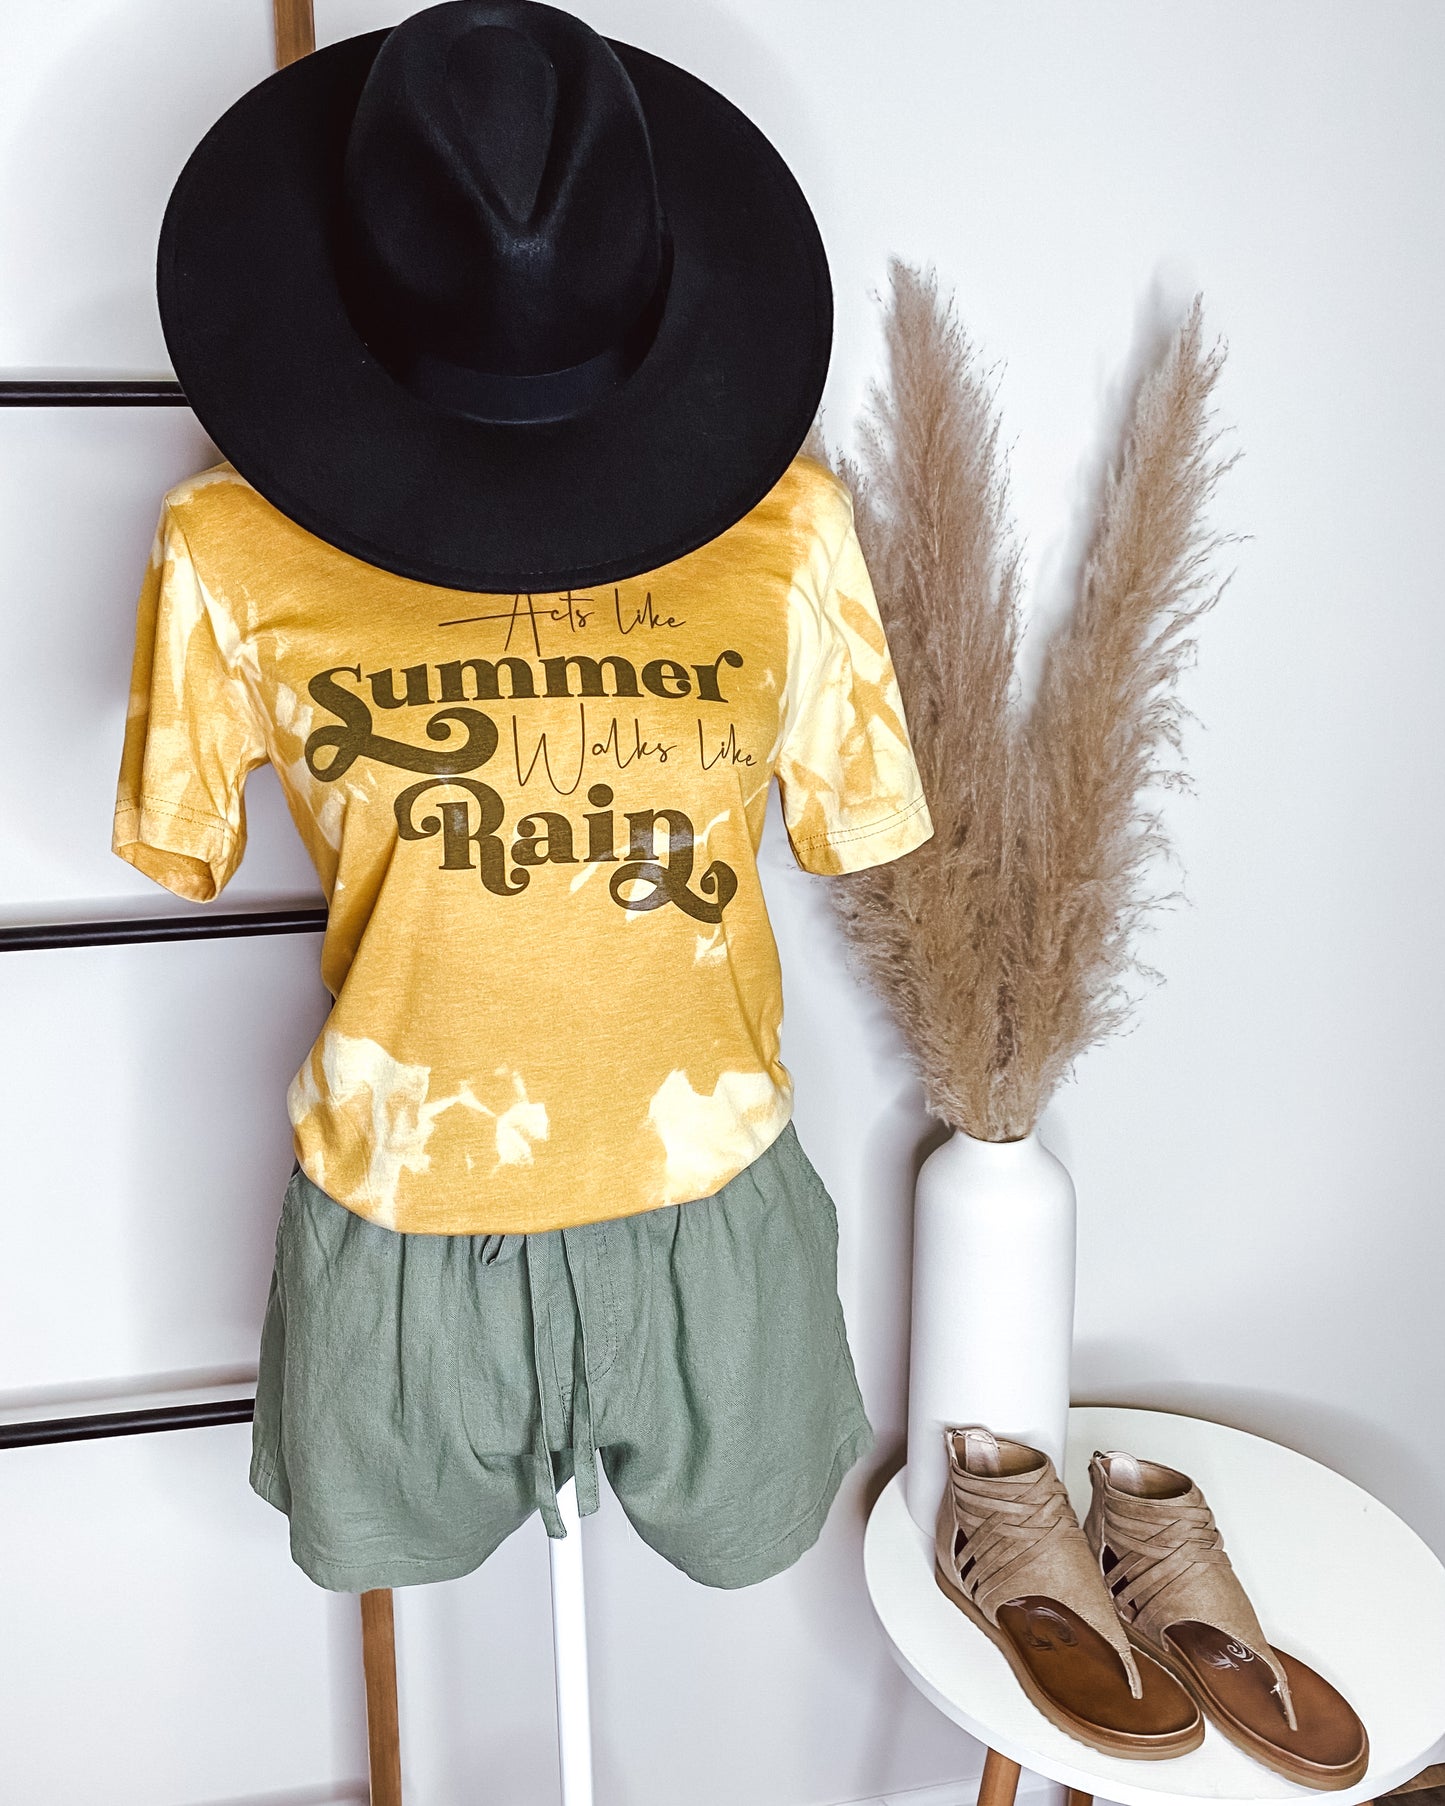 Acts Like Summer, Walks Like Rain Graphic Tee - Our Little Secret Boutique